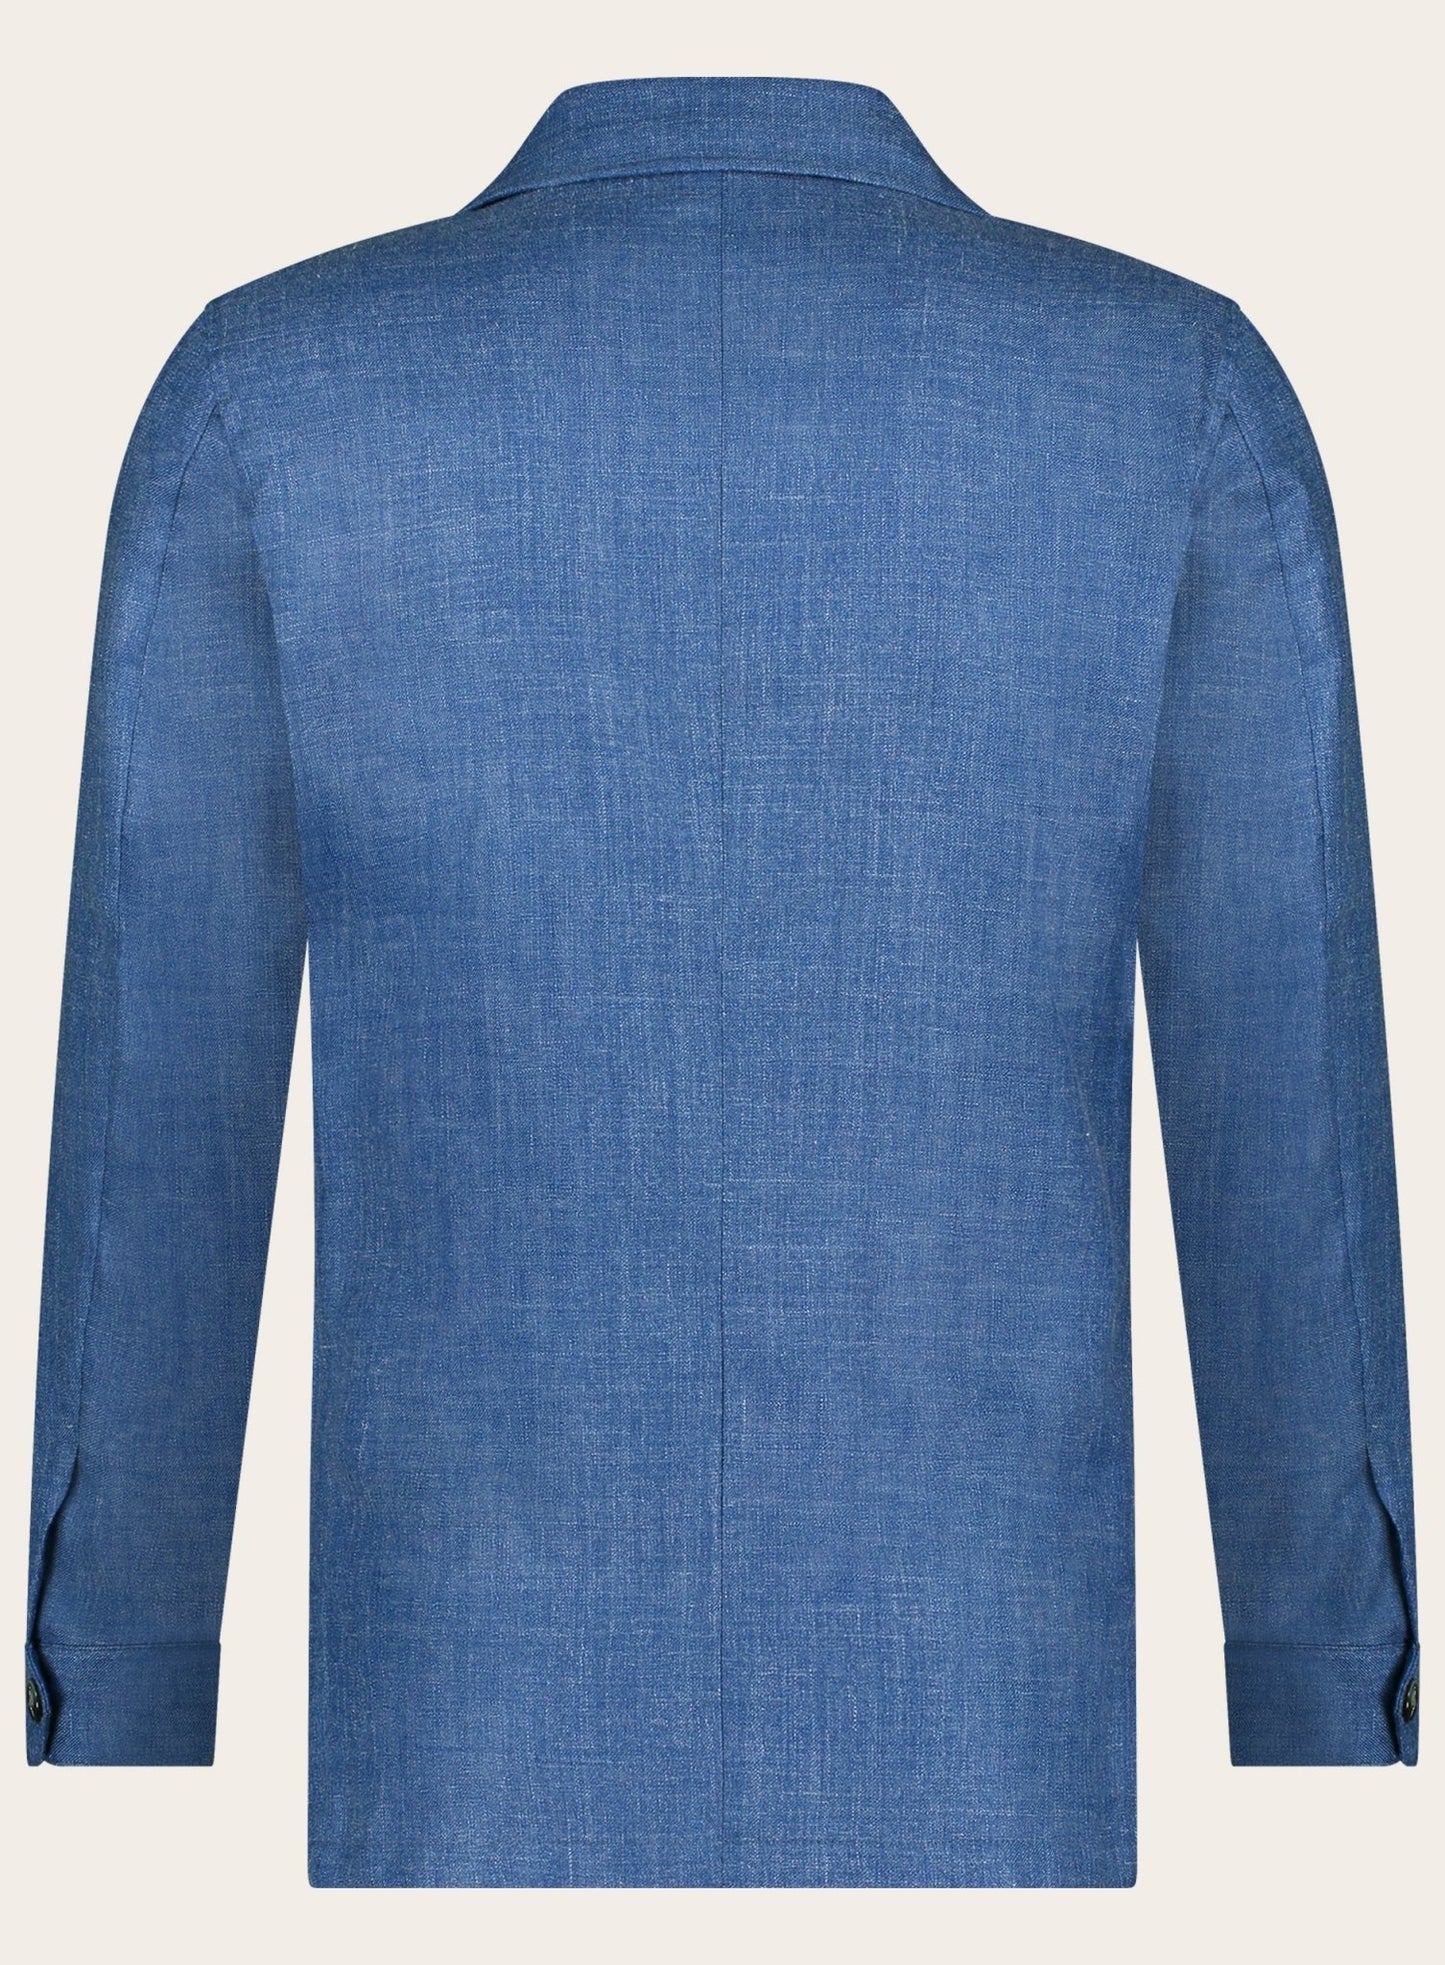 Jacket made of wool, silk and linen